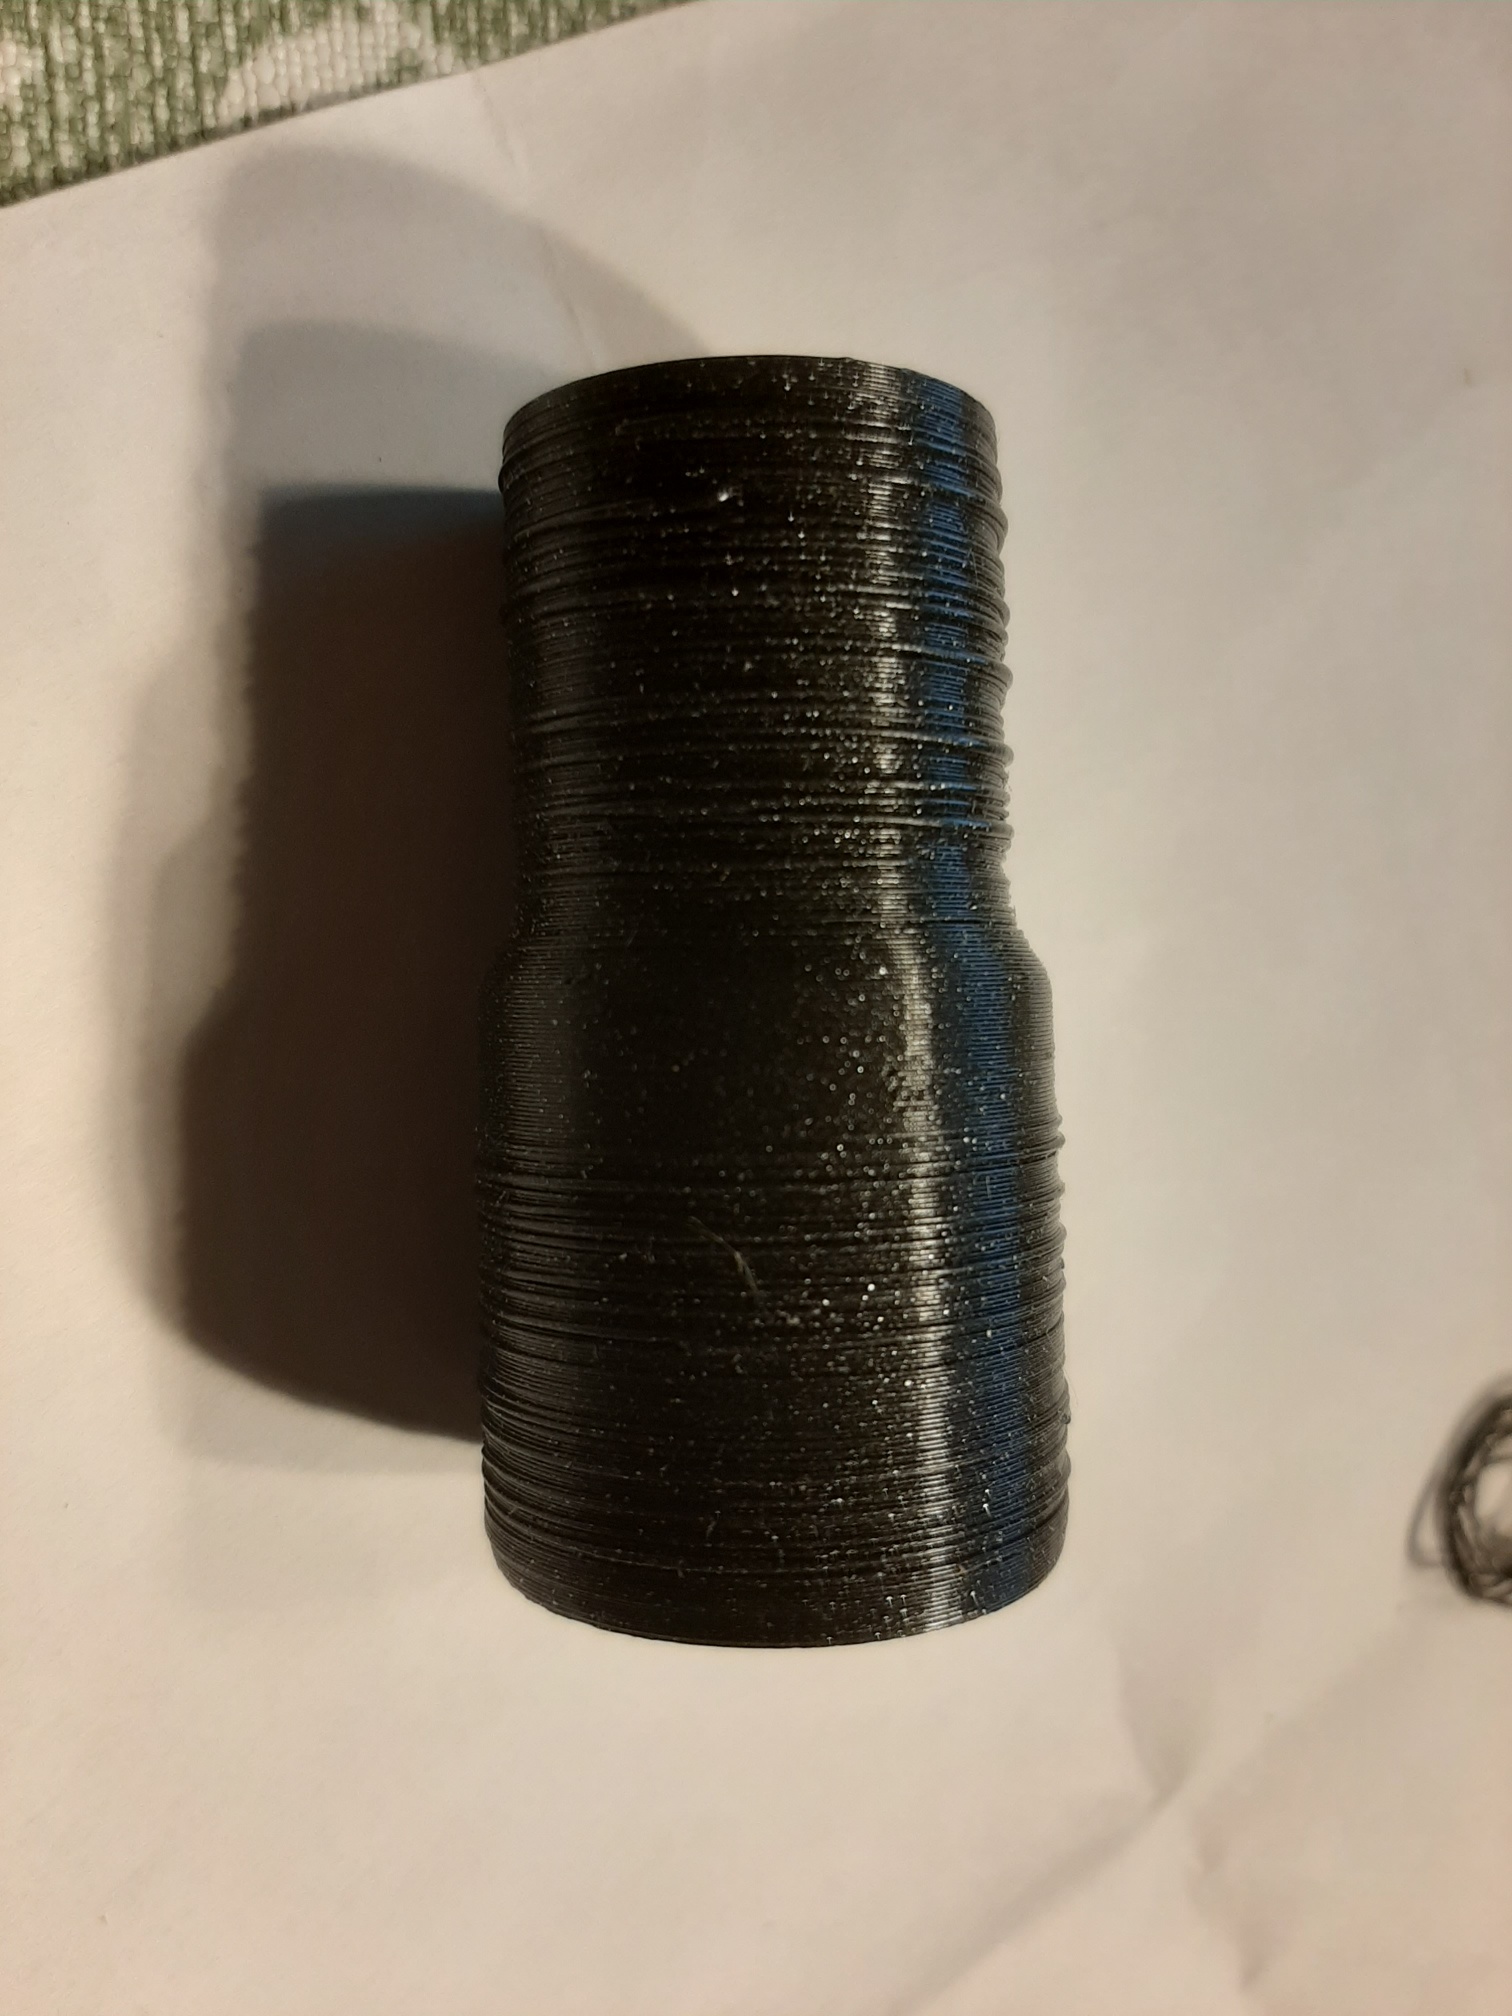 Prusa mini extrusion troubles – Assembly and first prints ...